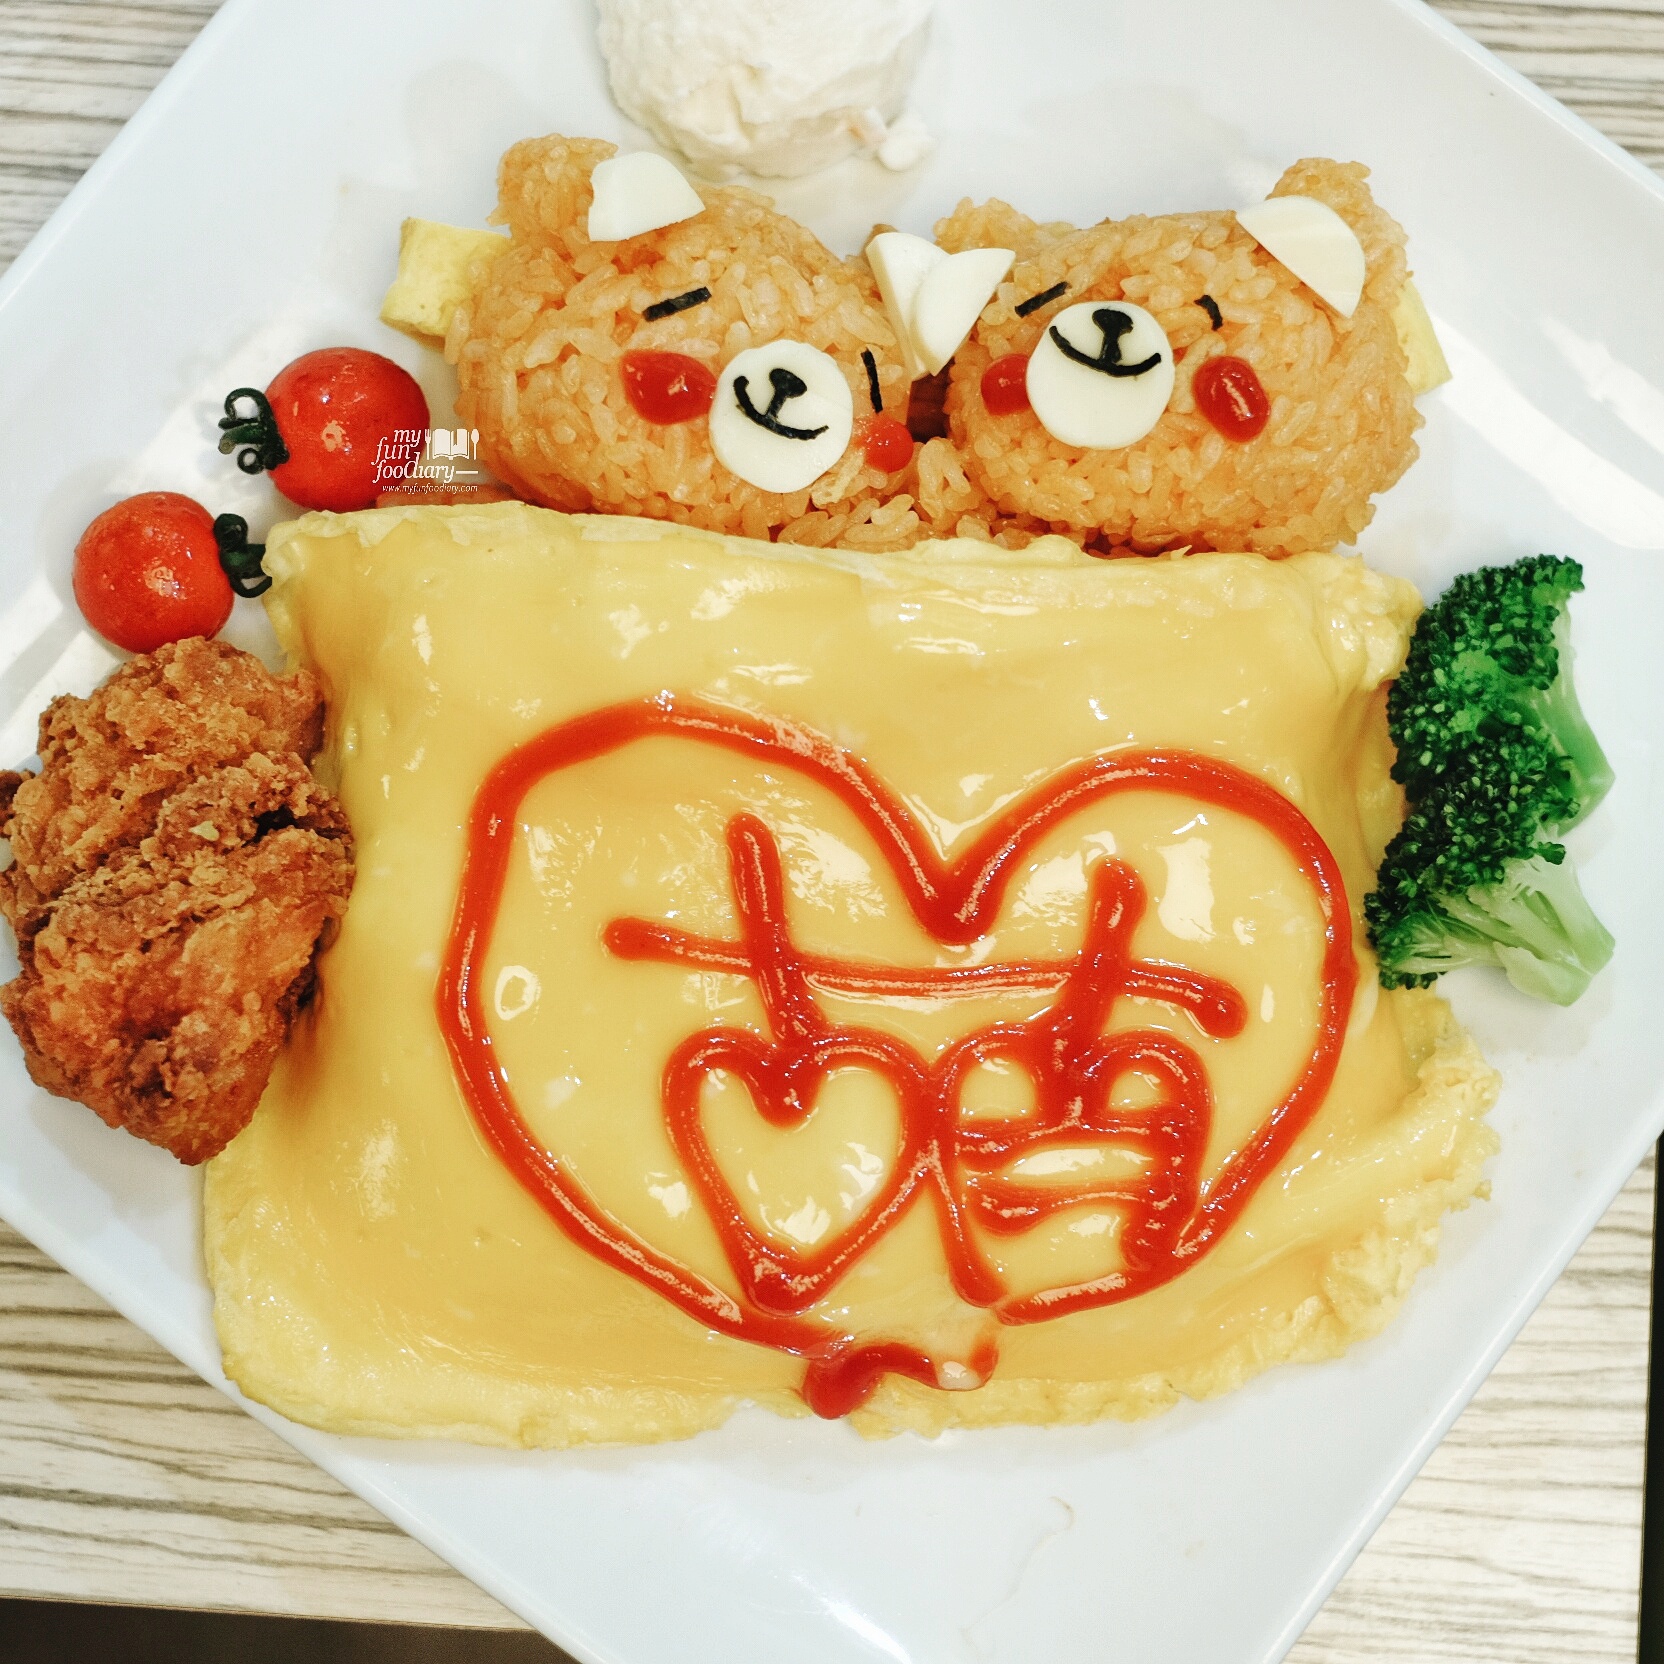 Twins Teddy Bear Omurice at Maids Dreamin Cafe by Myfunfoodiary